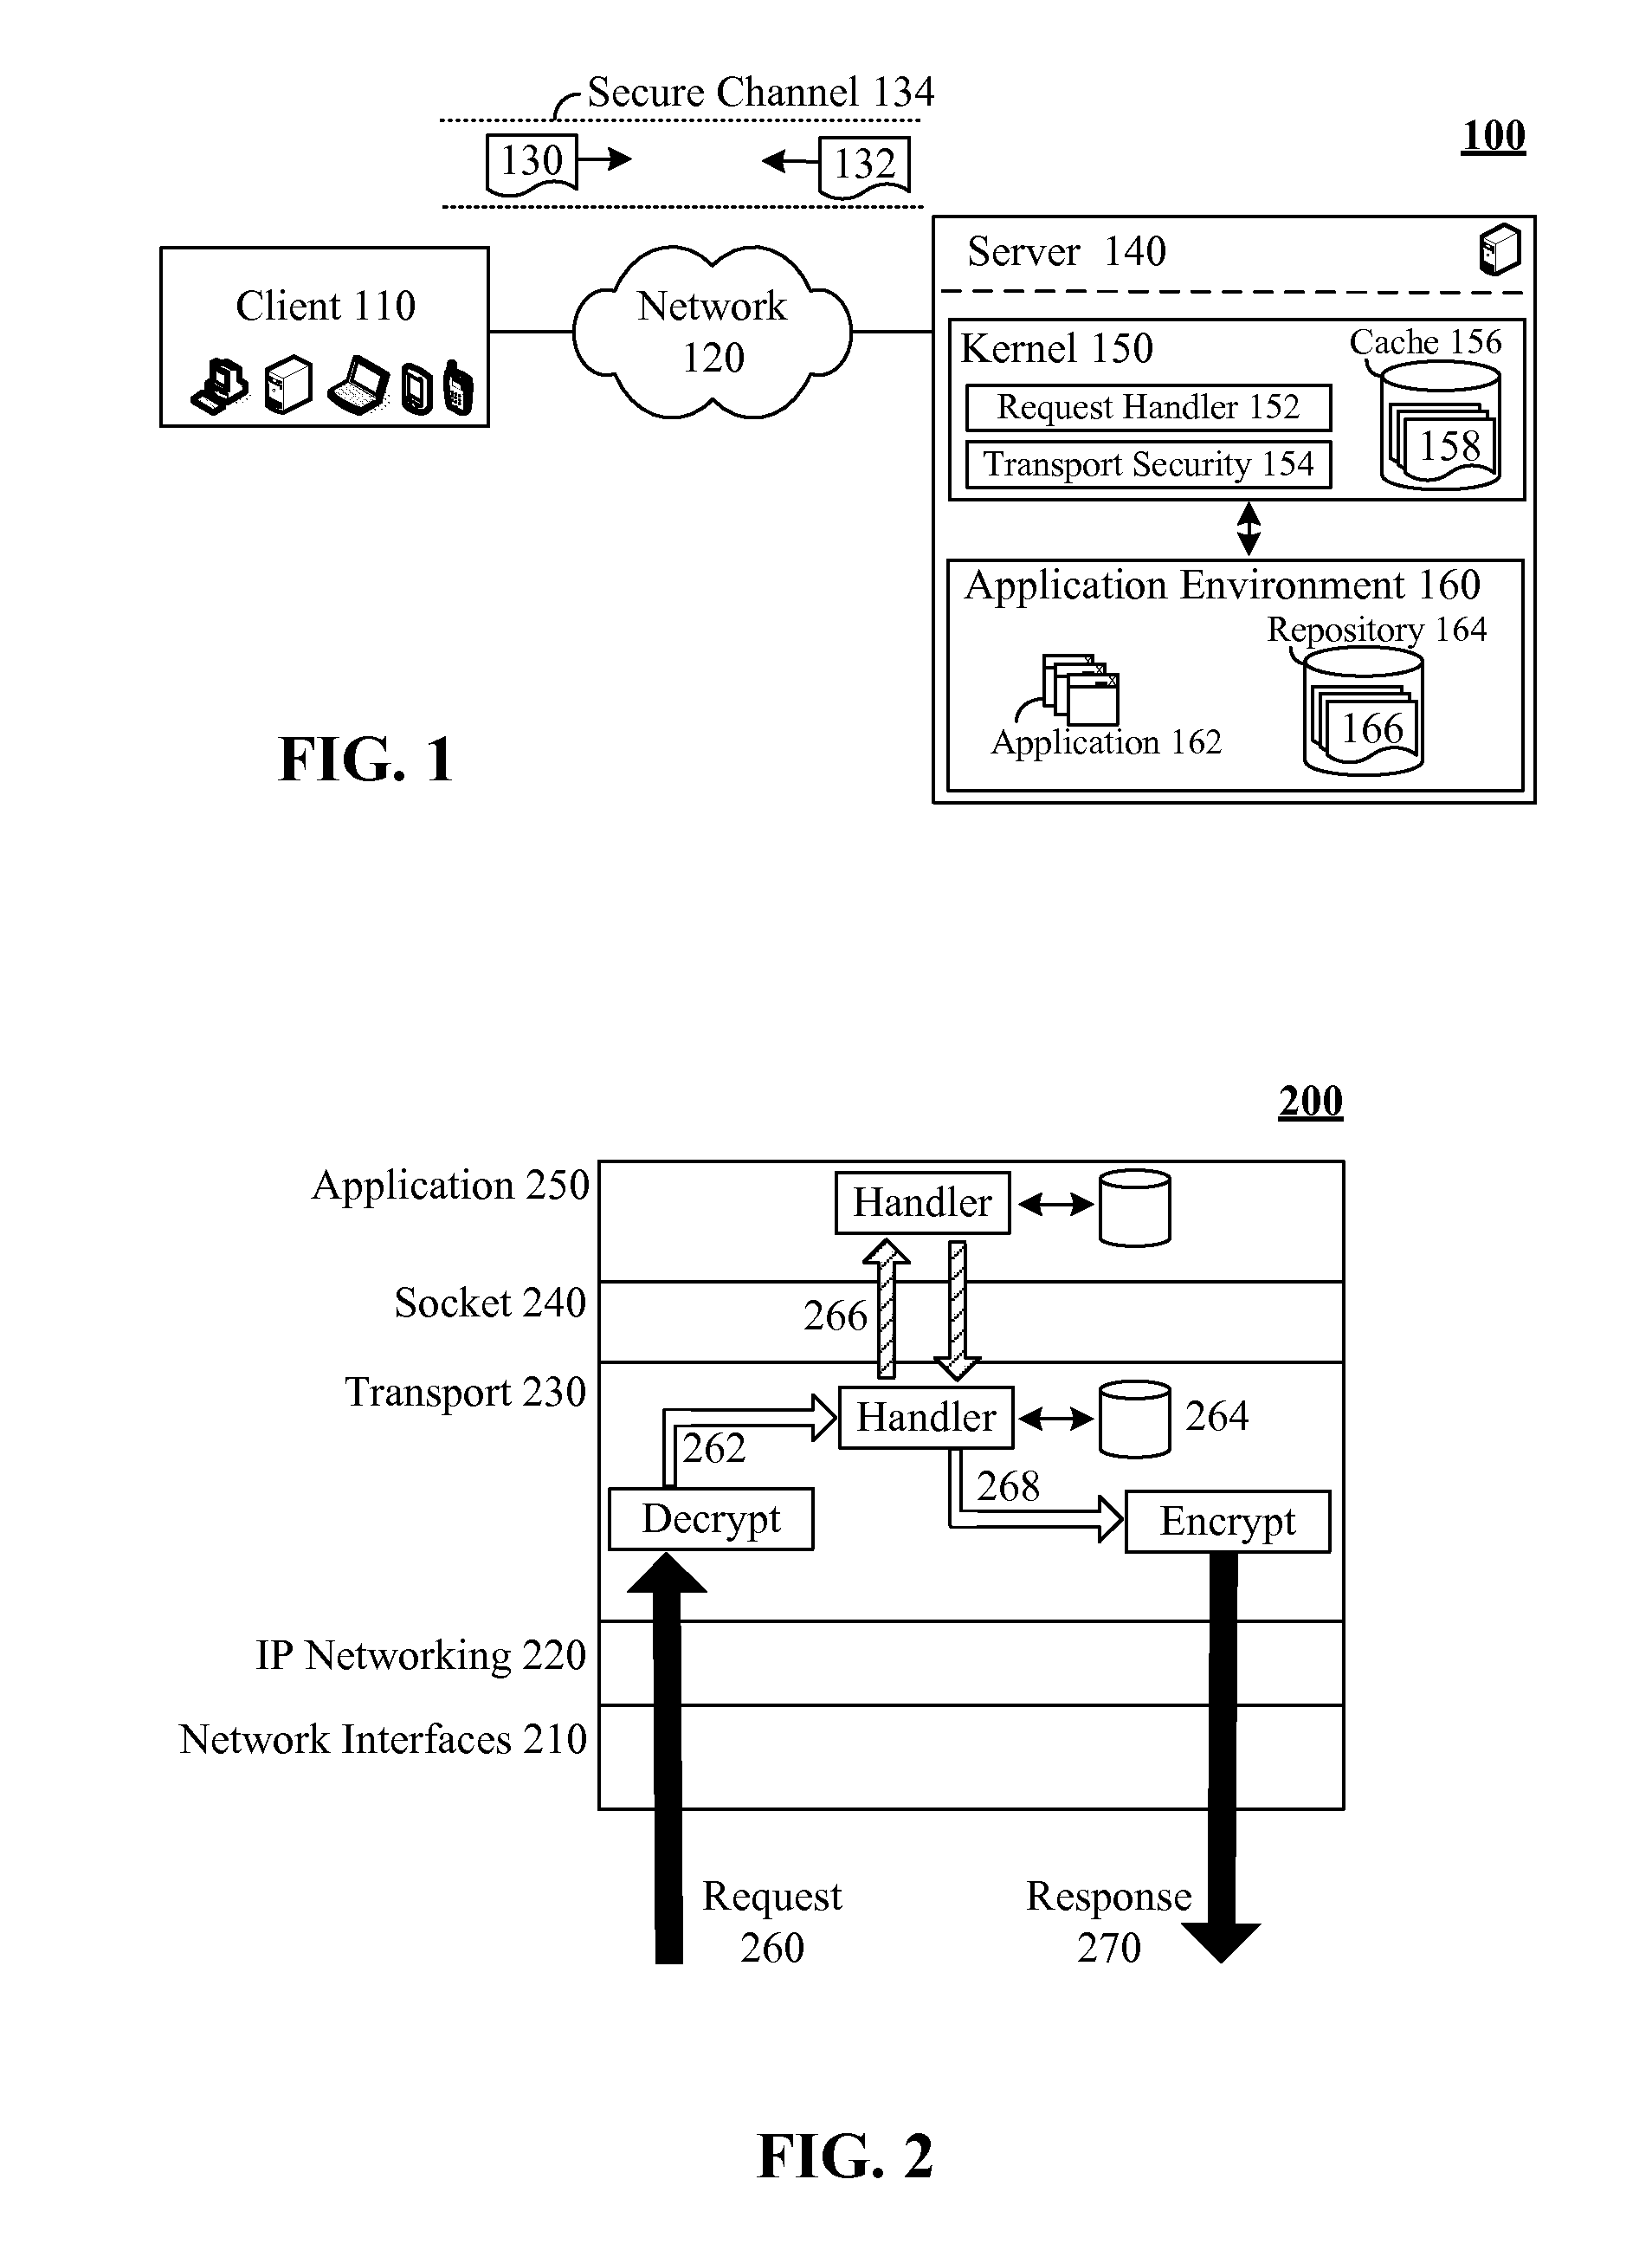 Secure request handling using a kernel level cache